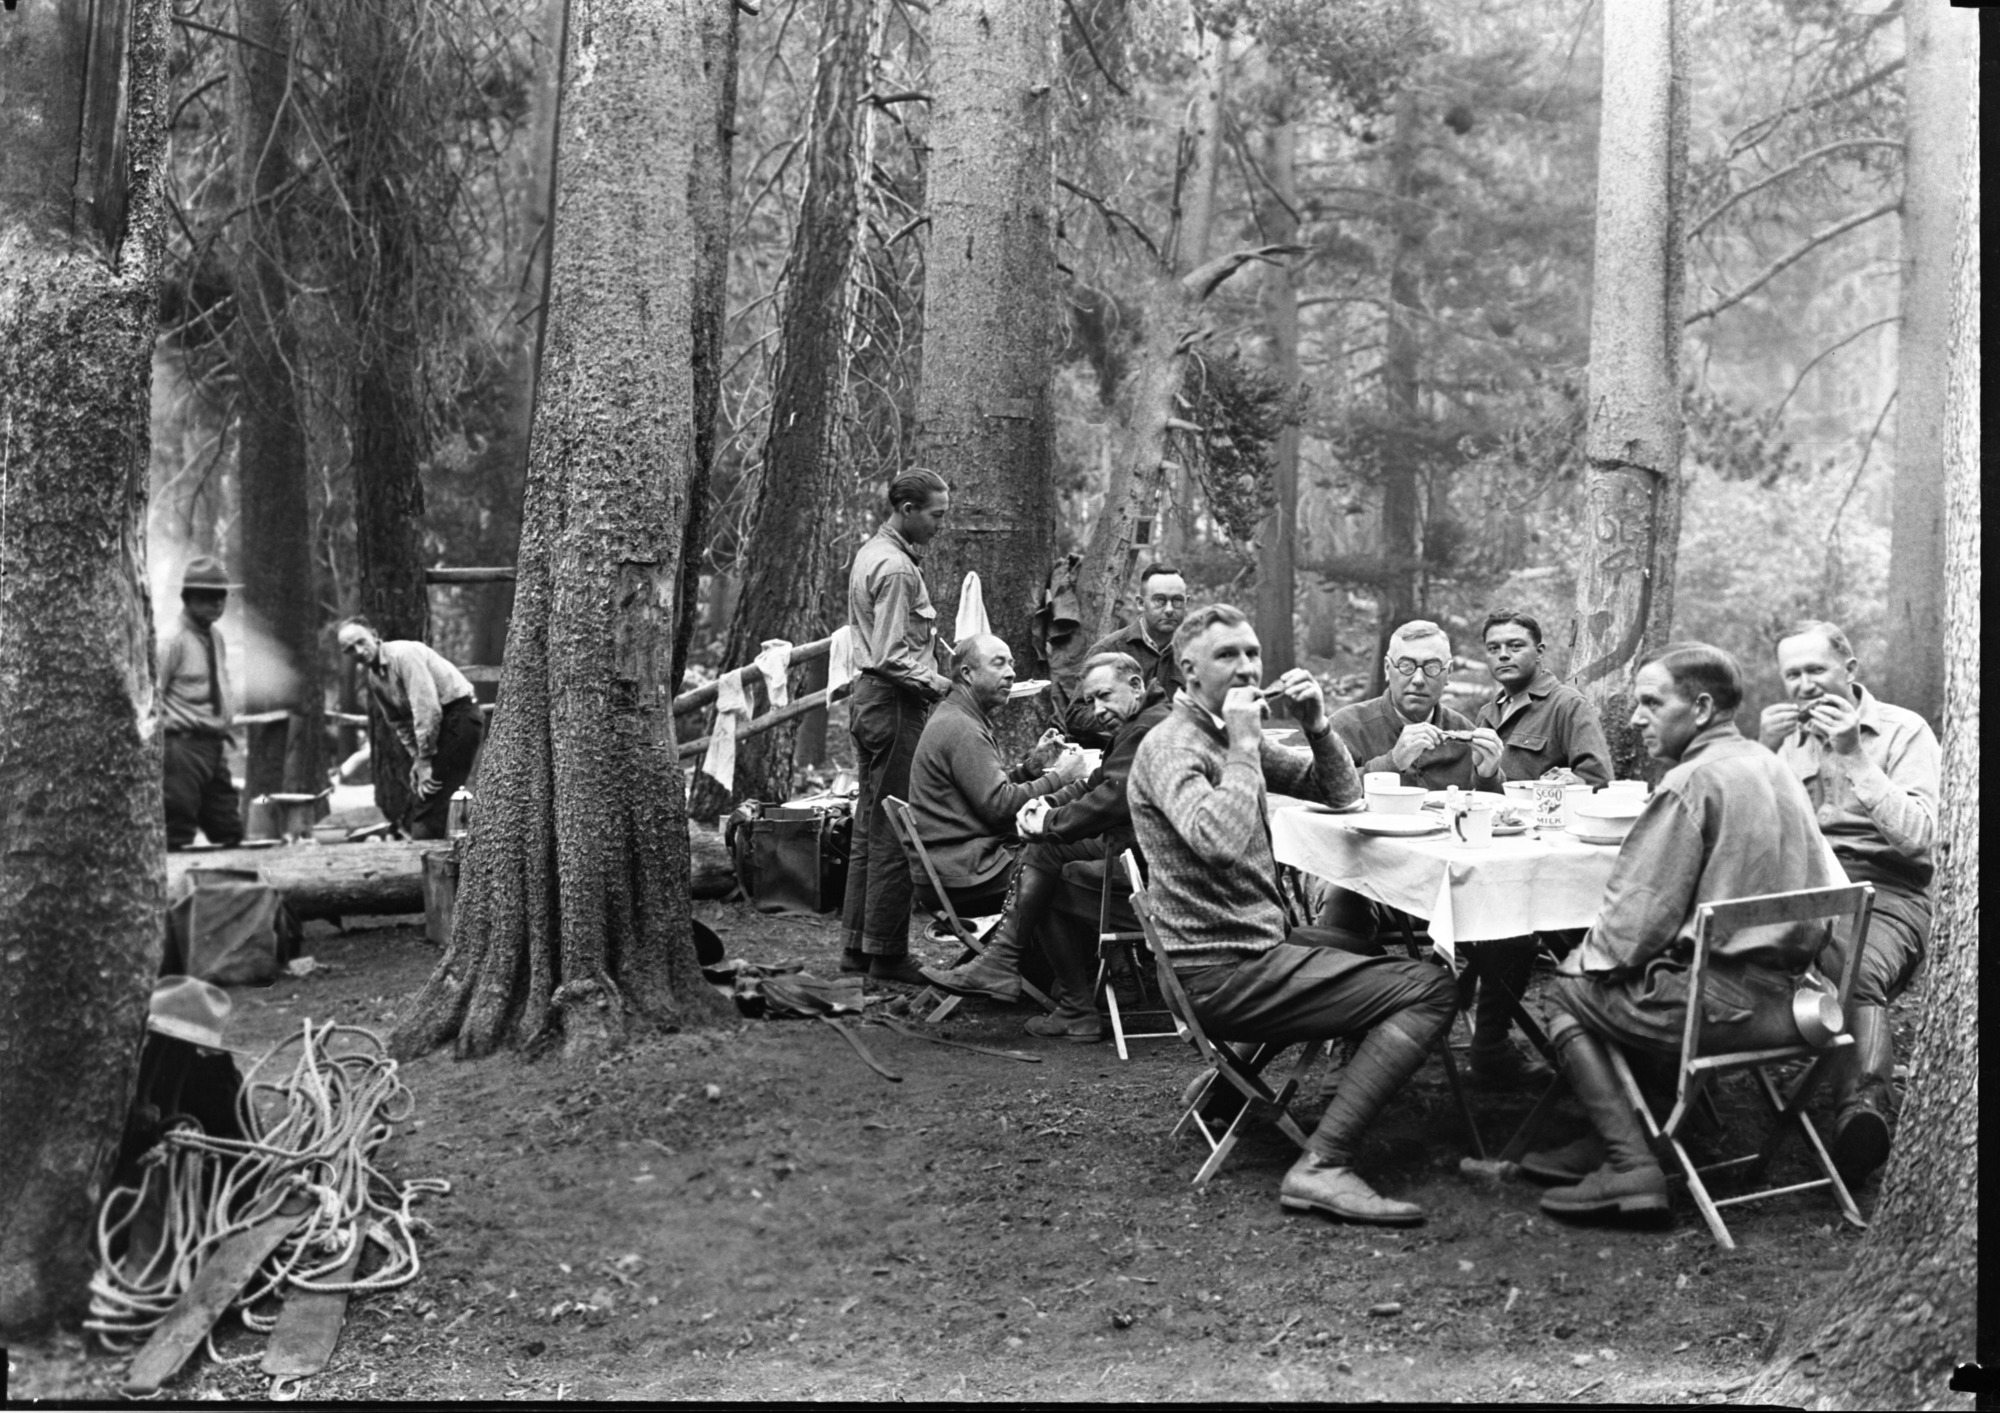 In camp on Sphinx Creek. Horace Albright on far right. (Kings Canyon Area)